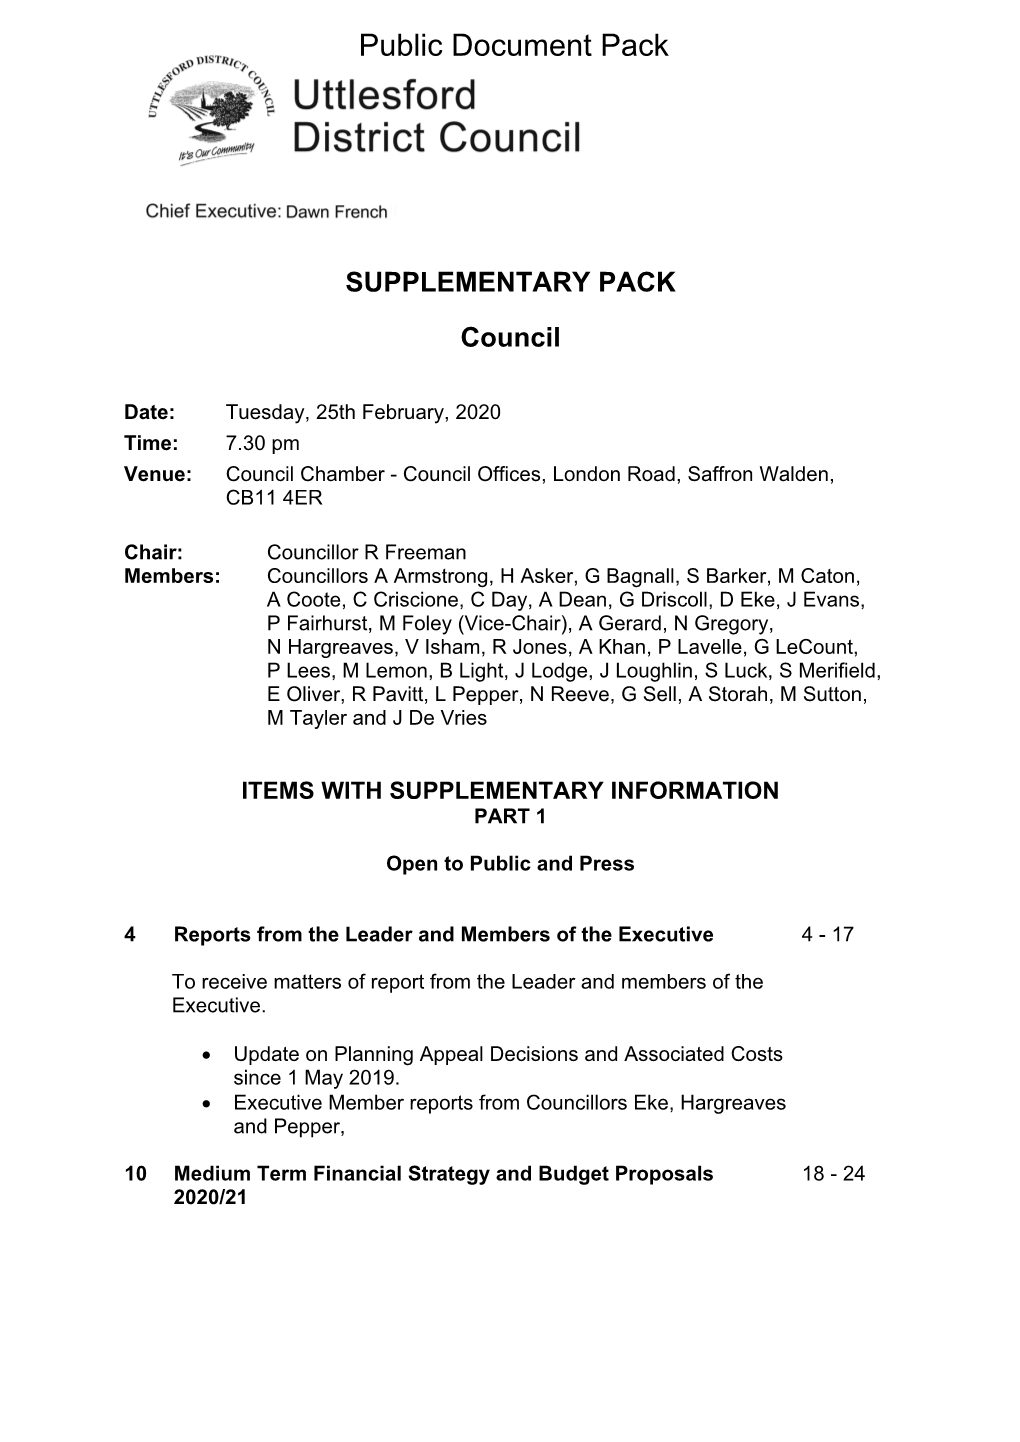 Supplementary Pack Agenda Supplement for Council, 25/02/2020